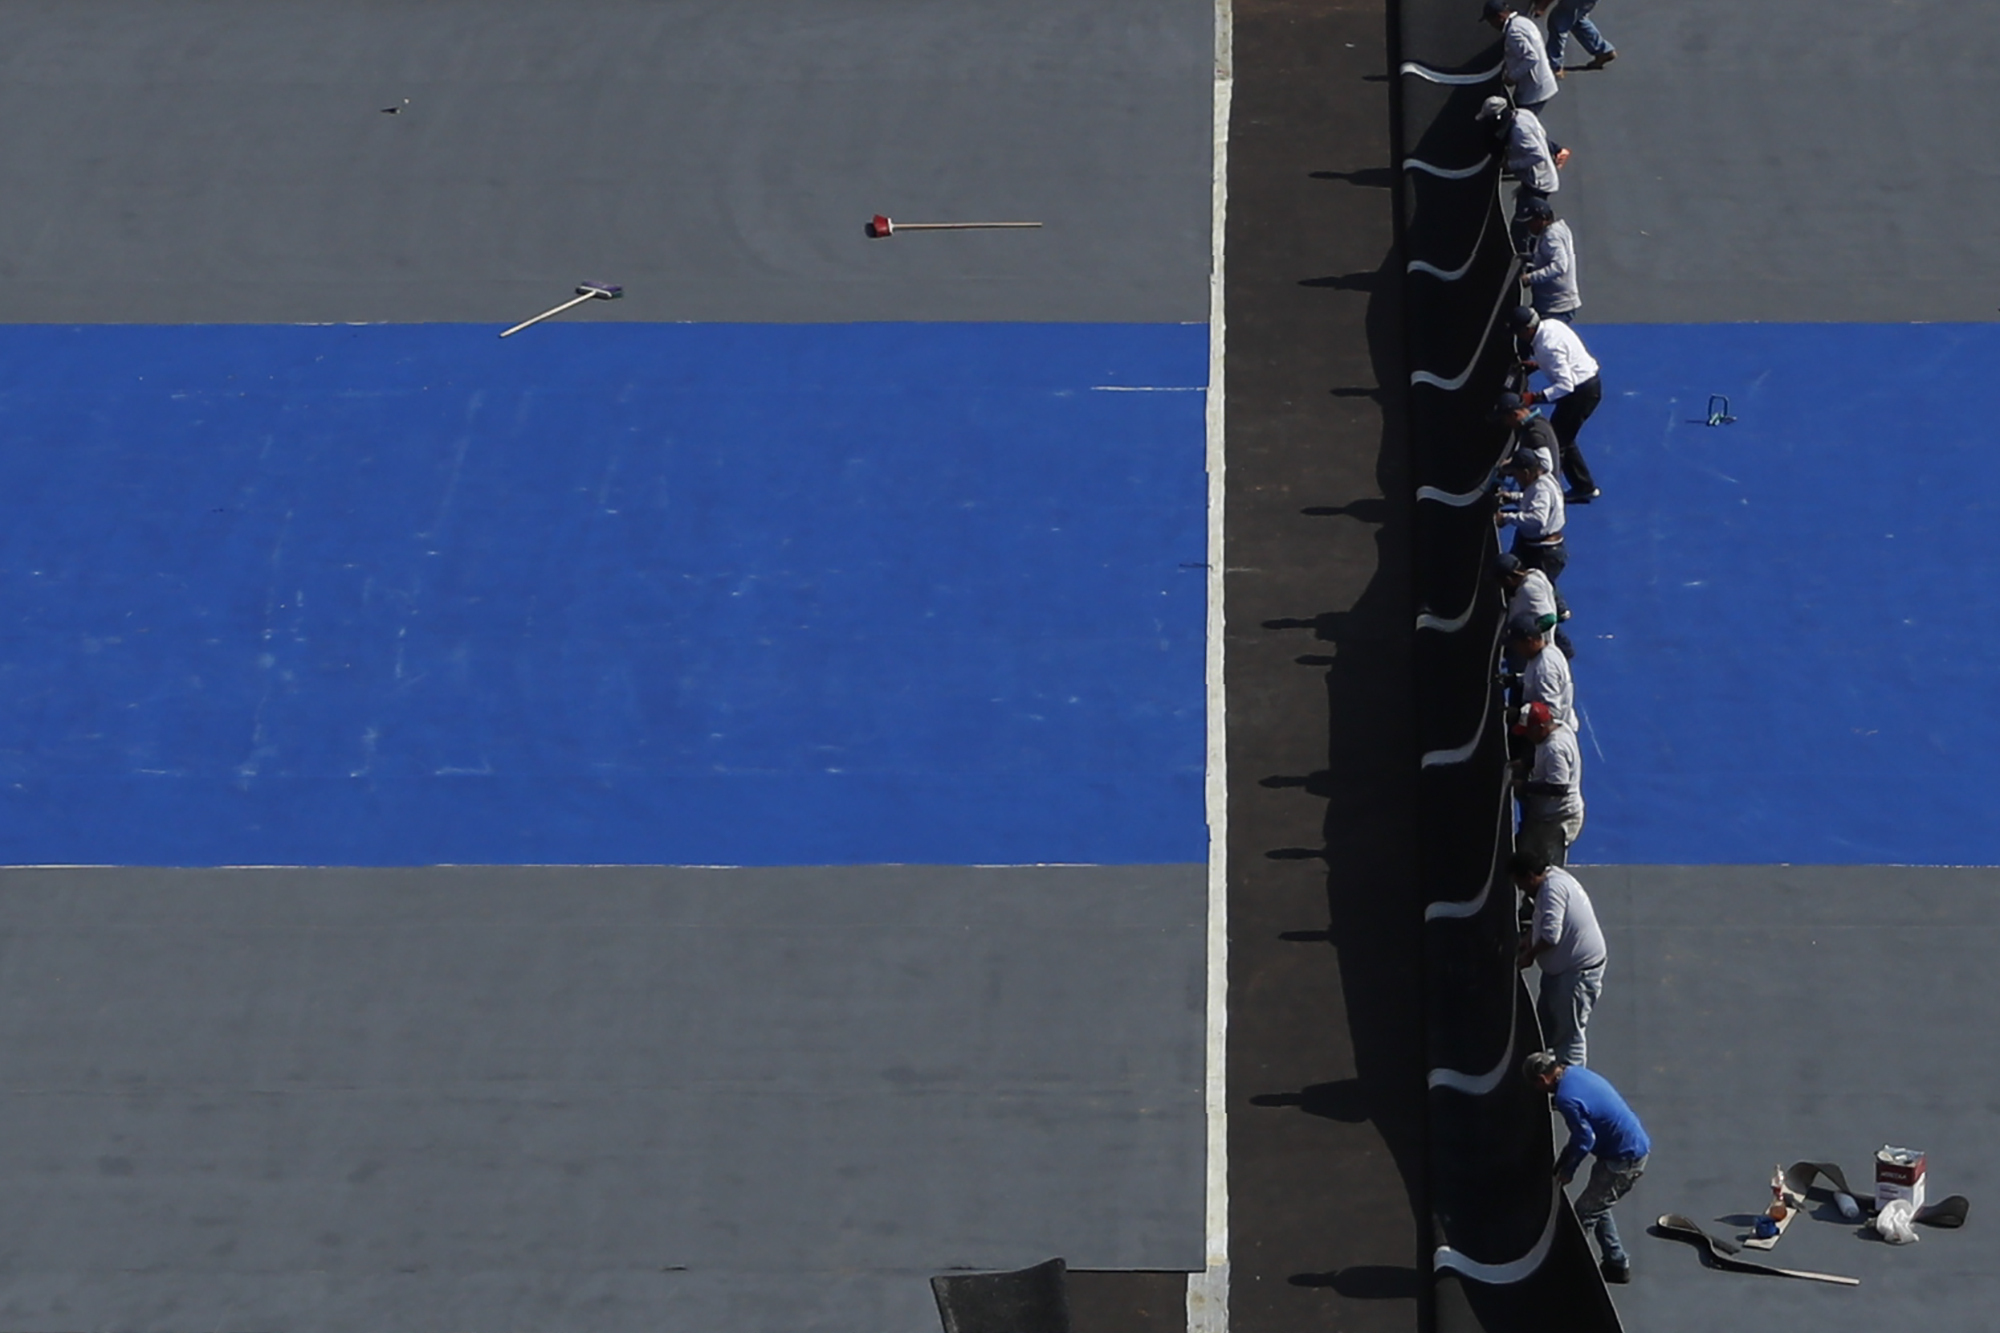 Workers lay down the court surface as they convert the Plaza de Toros Mexico bullring to host an upcoming exhibition tennis match between Swiss great Roger Federer and German rival Alexander Zverev, in Mexico City, Thursday, Nov. 21, 2019. Work began on the ring last Sunday to flatten the surface and leave it free of lumps. (AP Photo/Rebecca Blackwell)